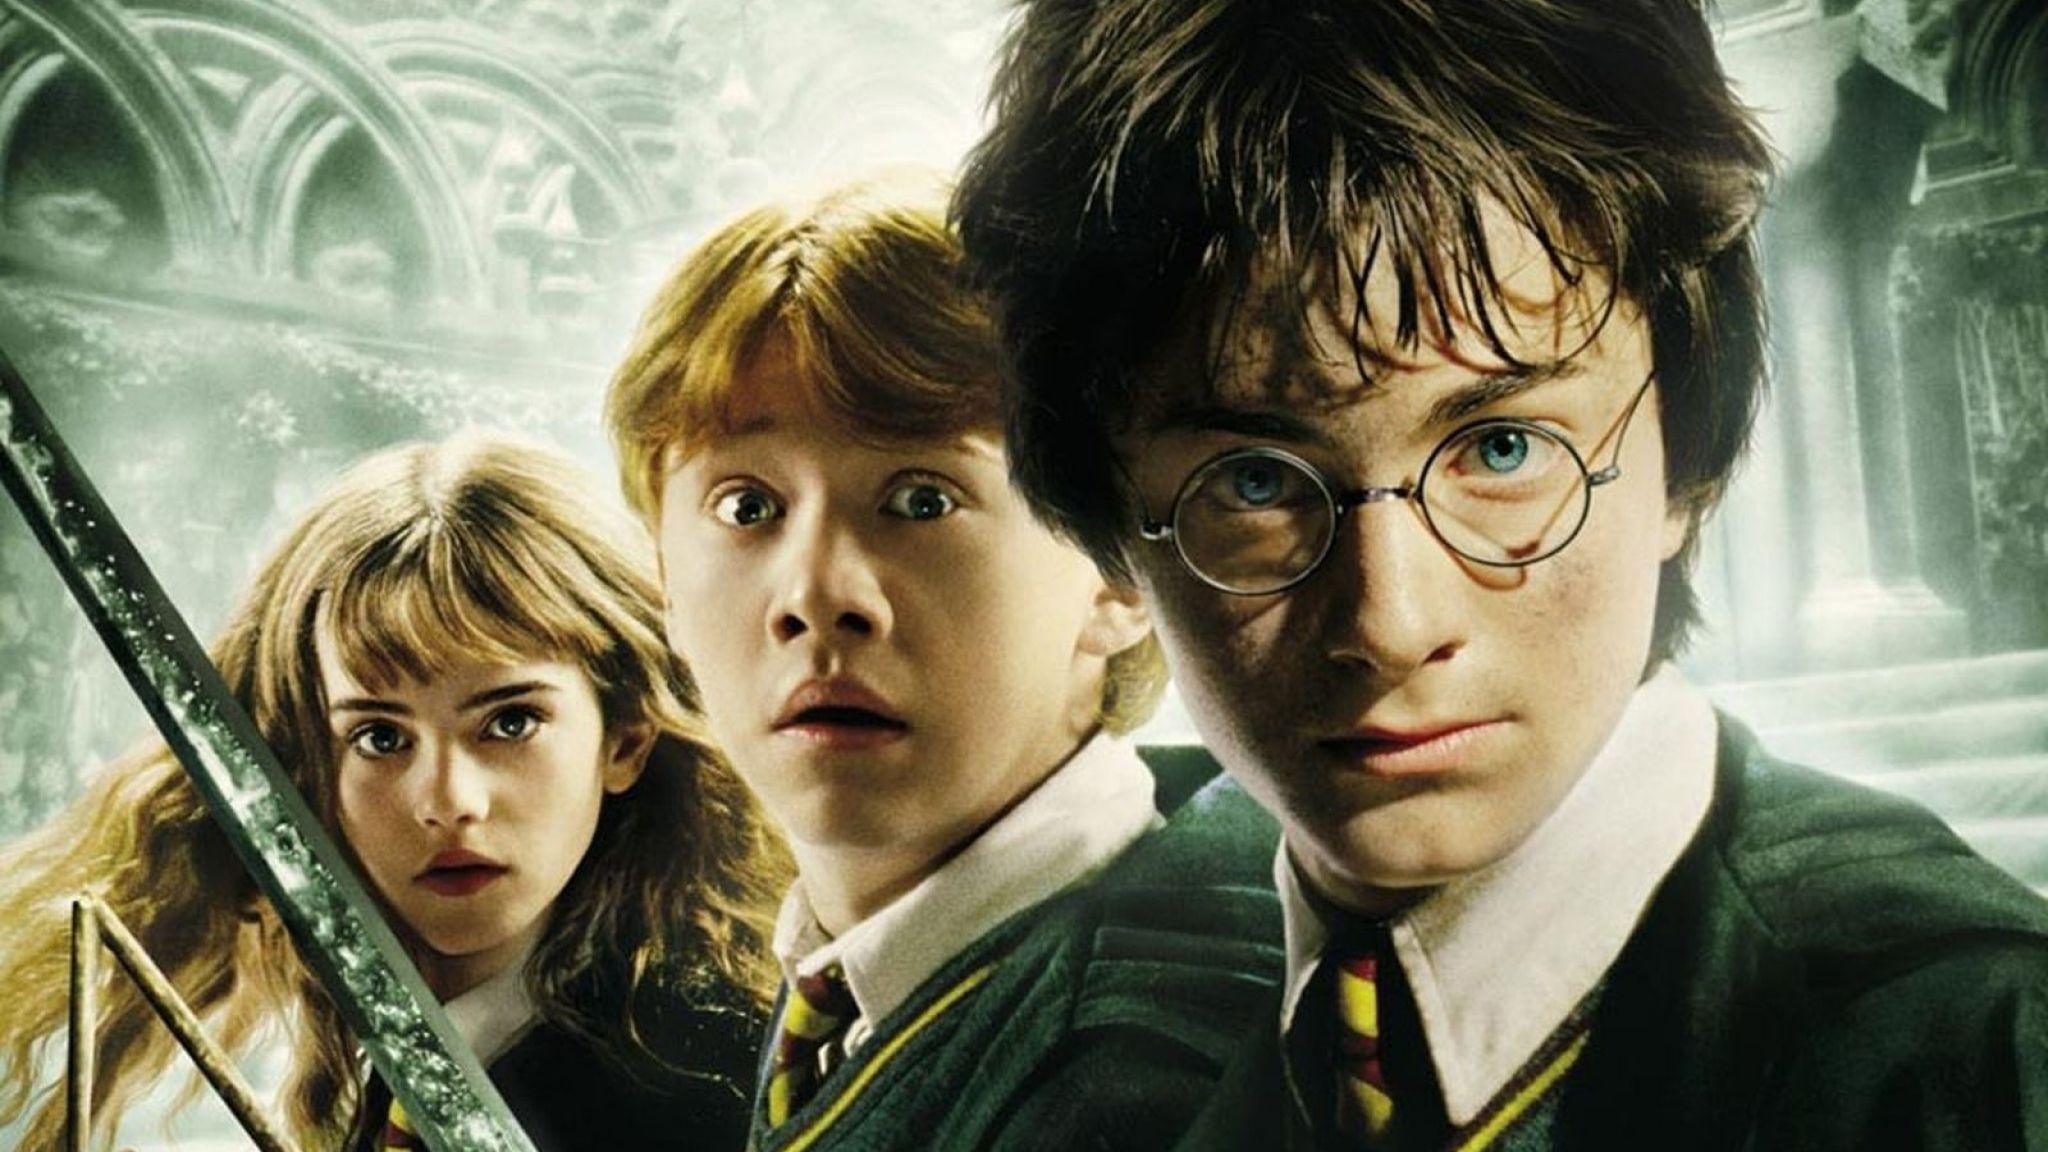 Download Wallpaper 2048x1152 Harry potter and the chamber